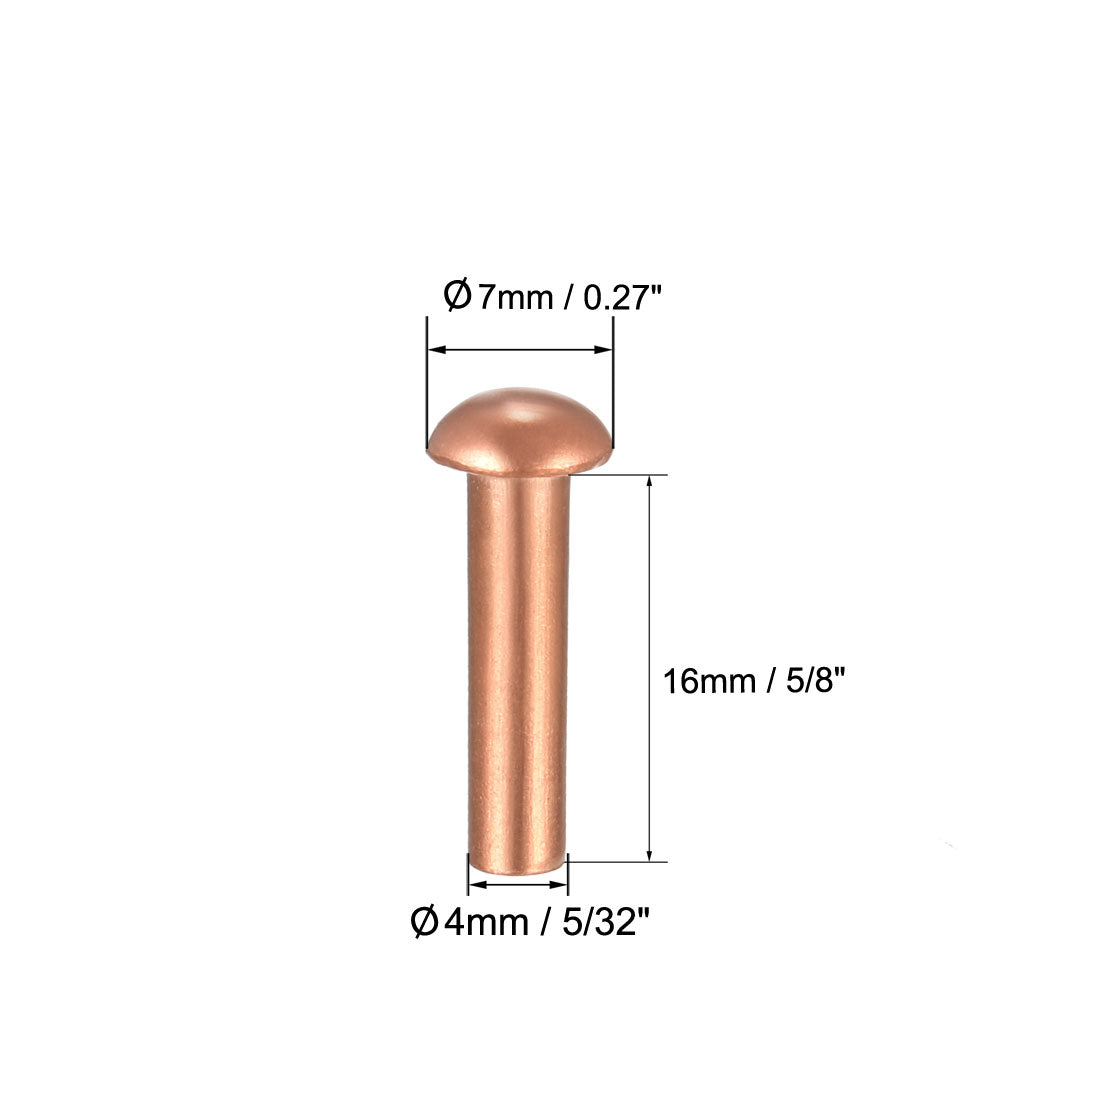 Uxcell Uxcell 50 Pcs 1/8inch x 15/32inch Round Head Copper Solid Rivets Fasteners